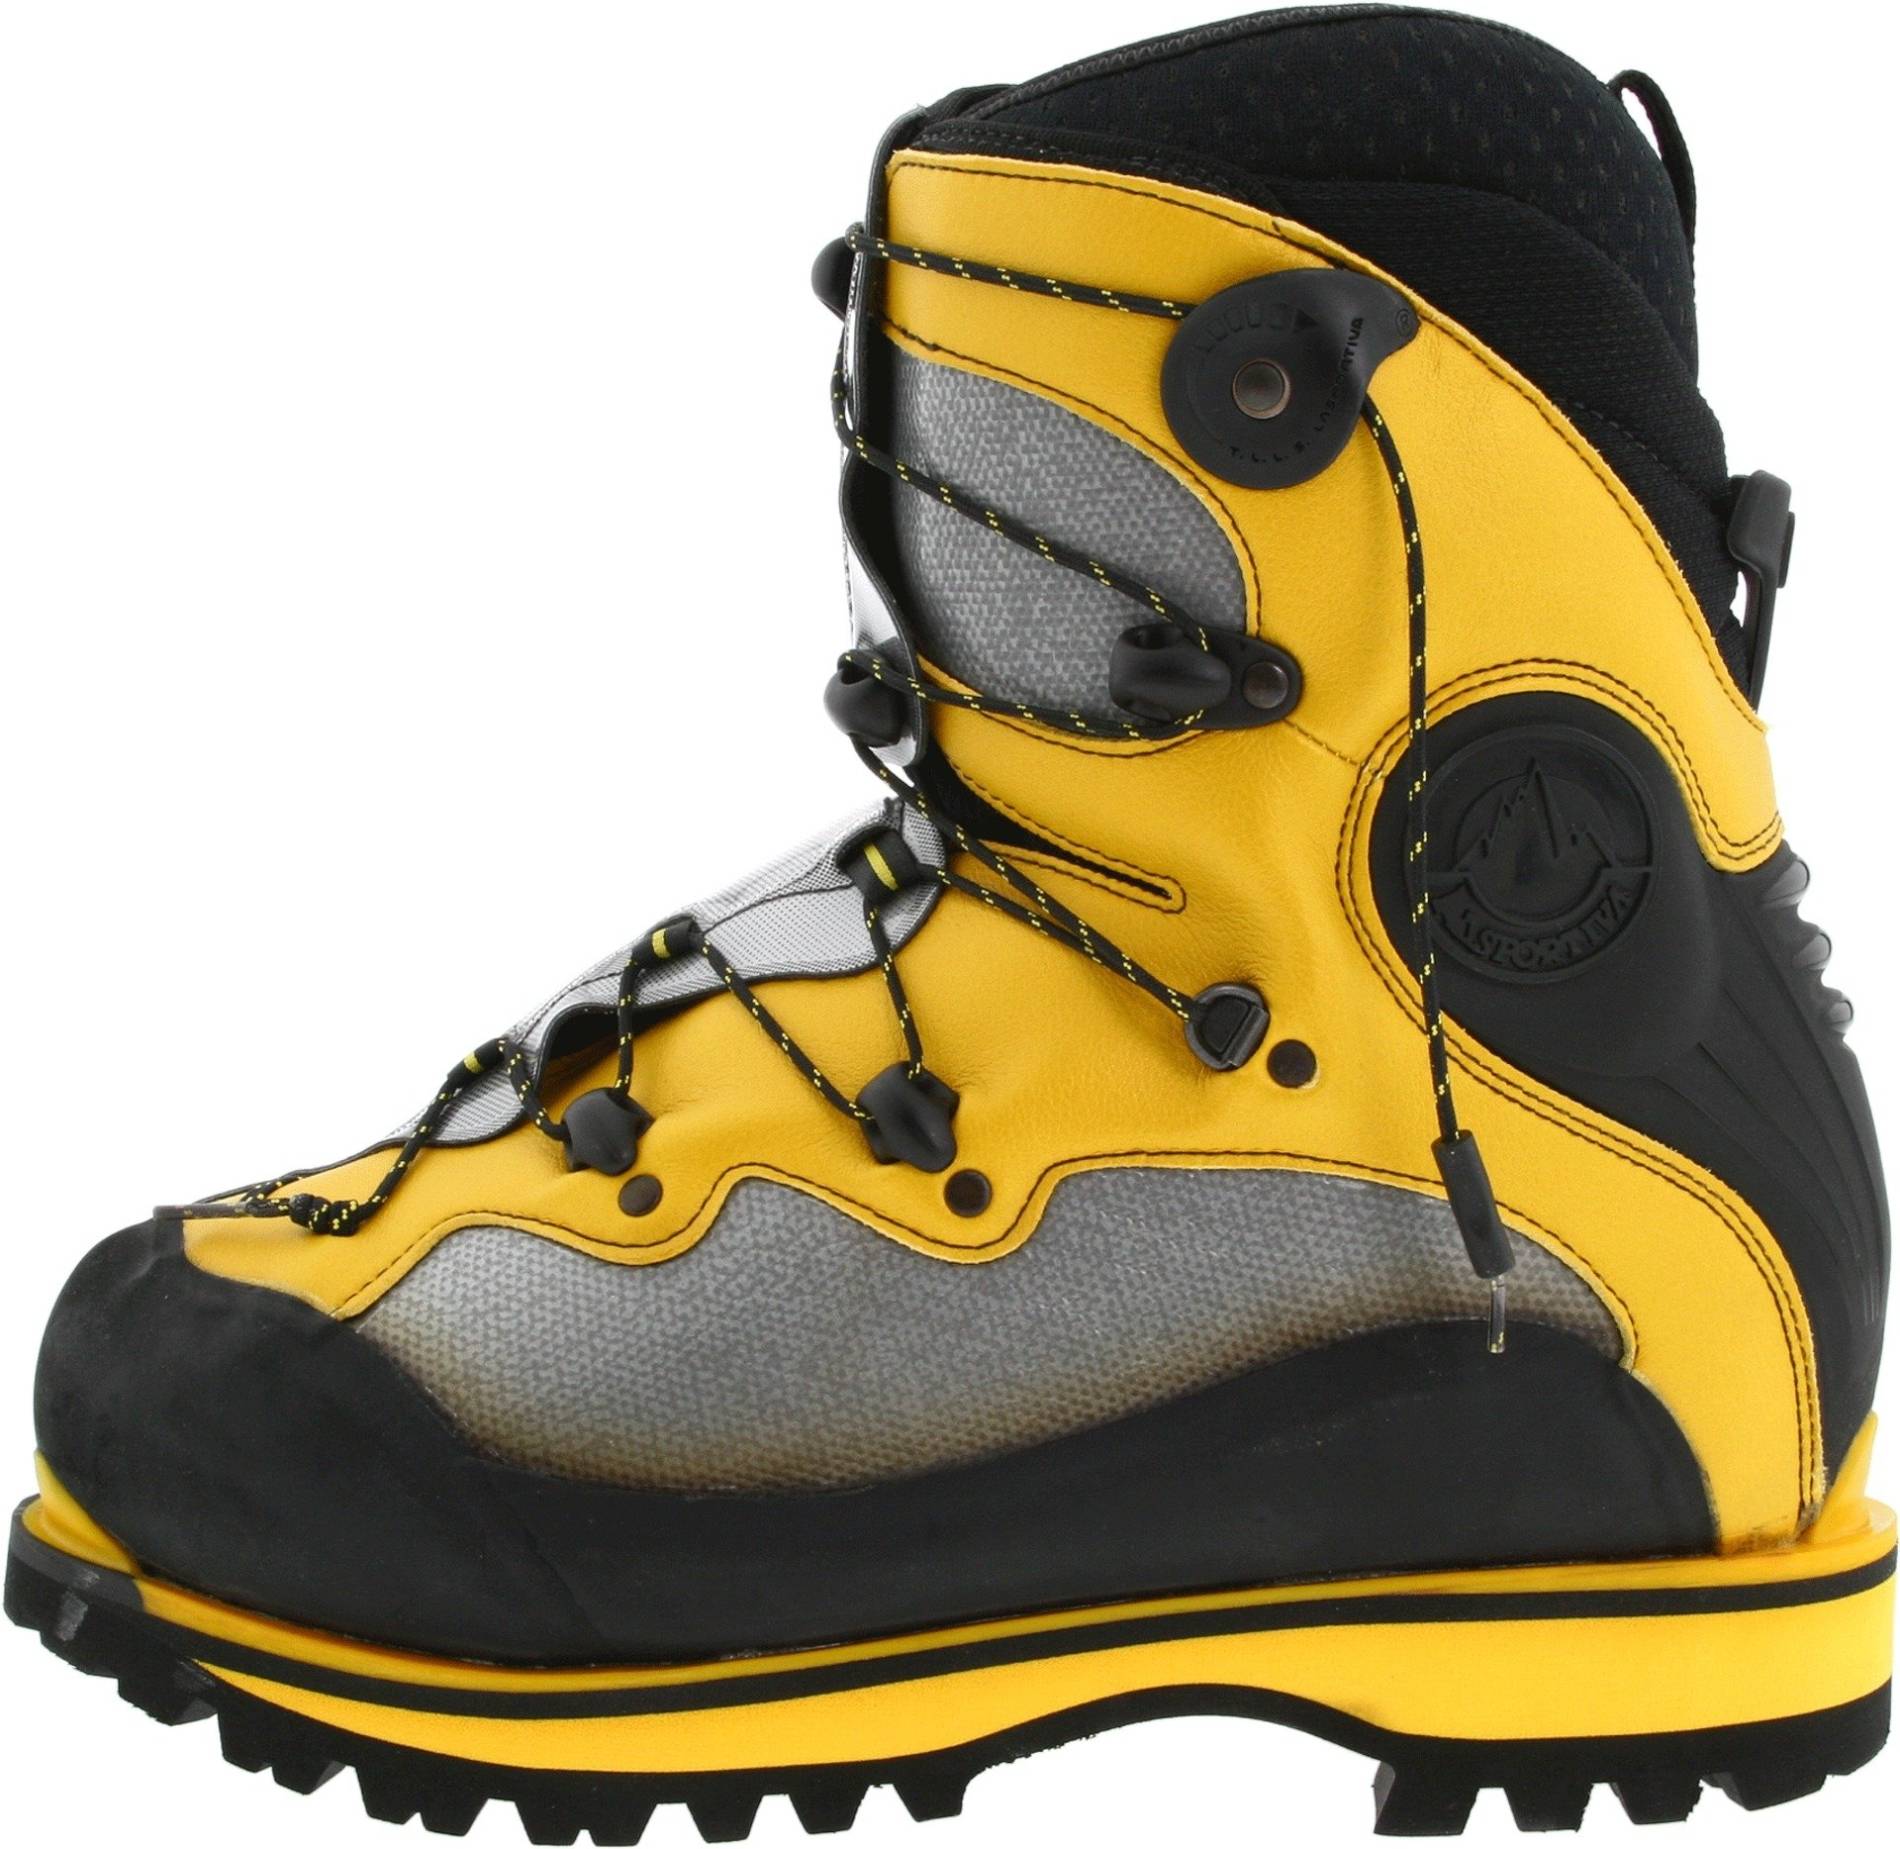 mountaineering boots sale